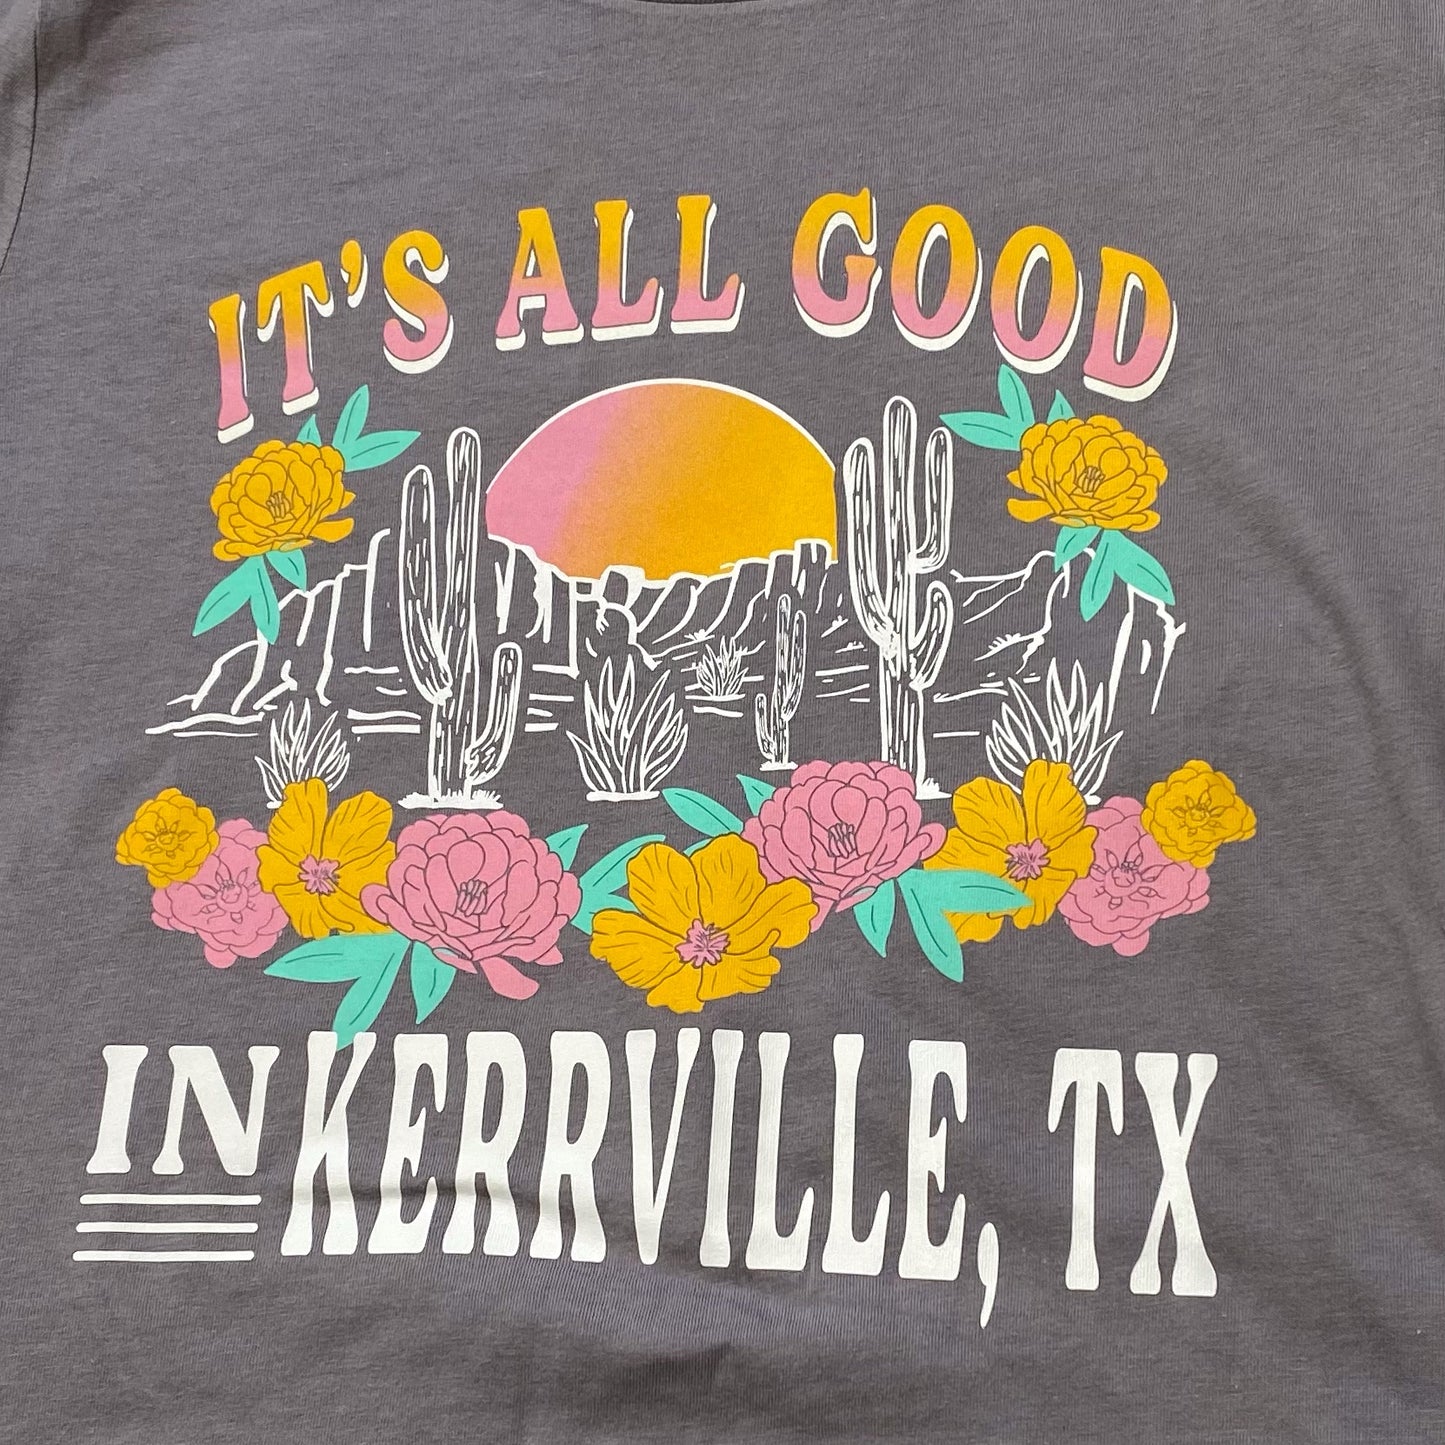 It's All Good in Kerrville, TX Graphic T-Shirt